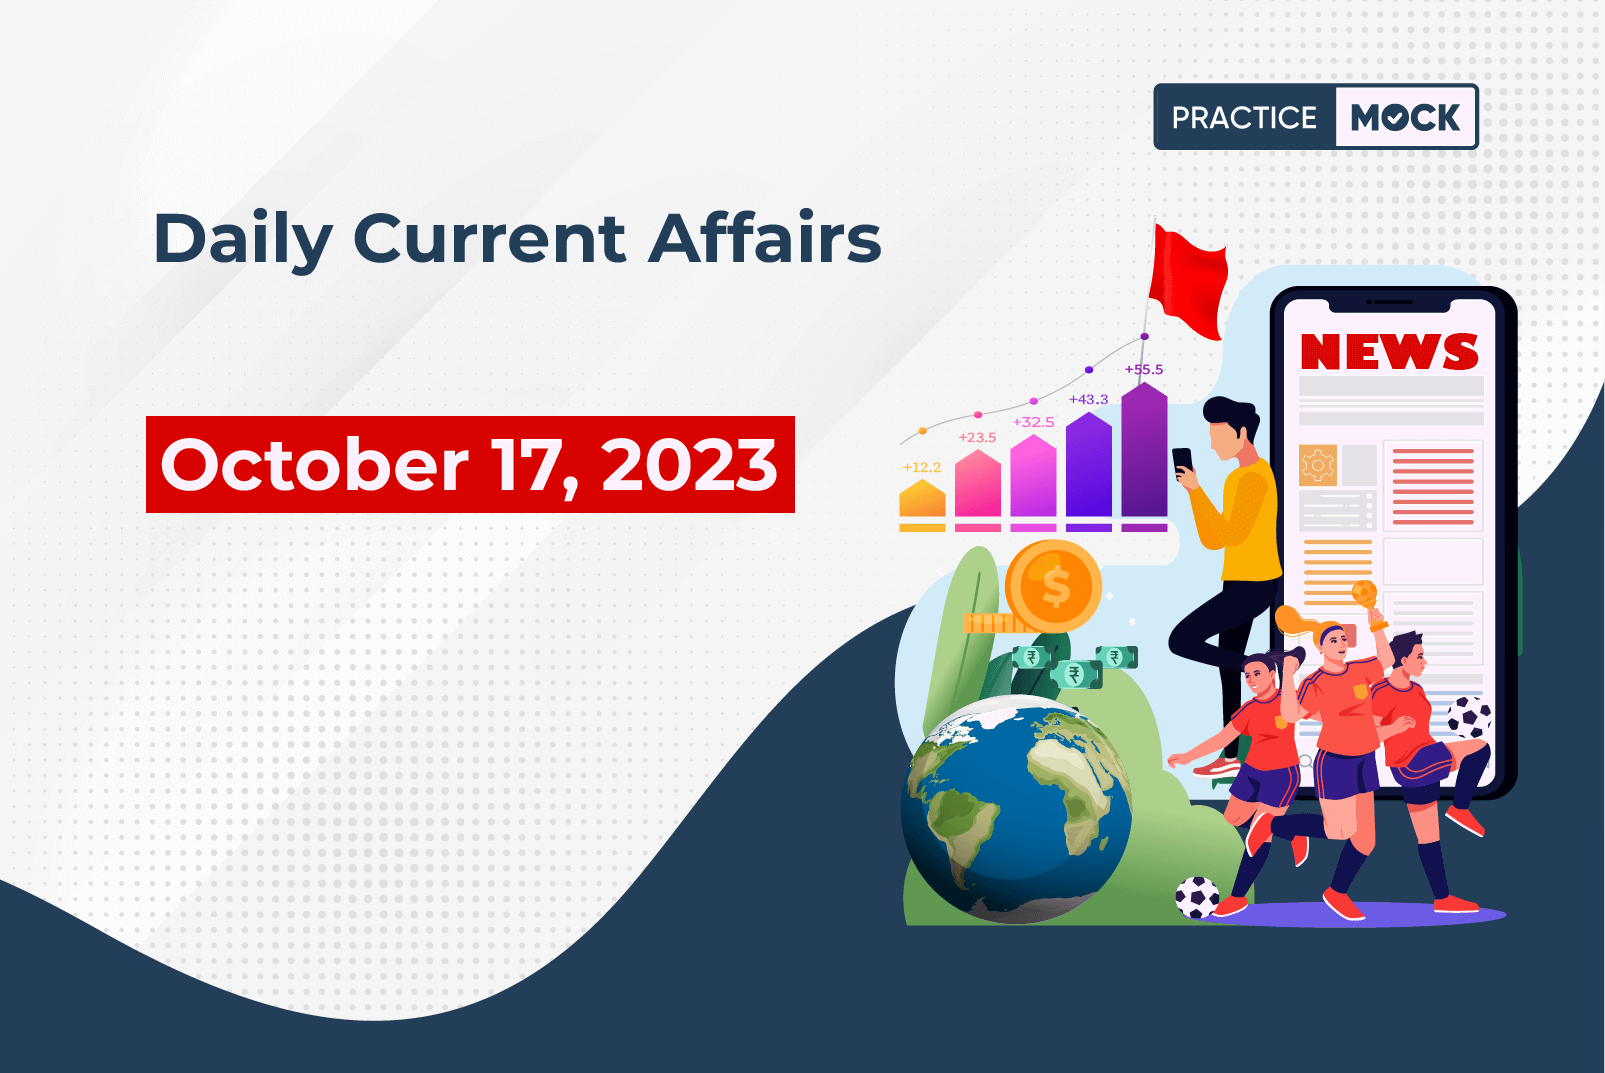 Daily Current Affairs- October 17, 2023 (1)